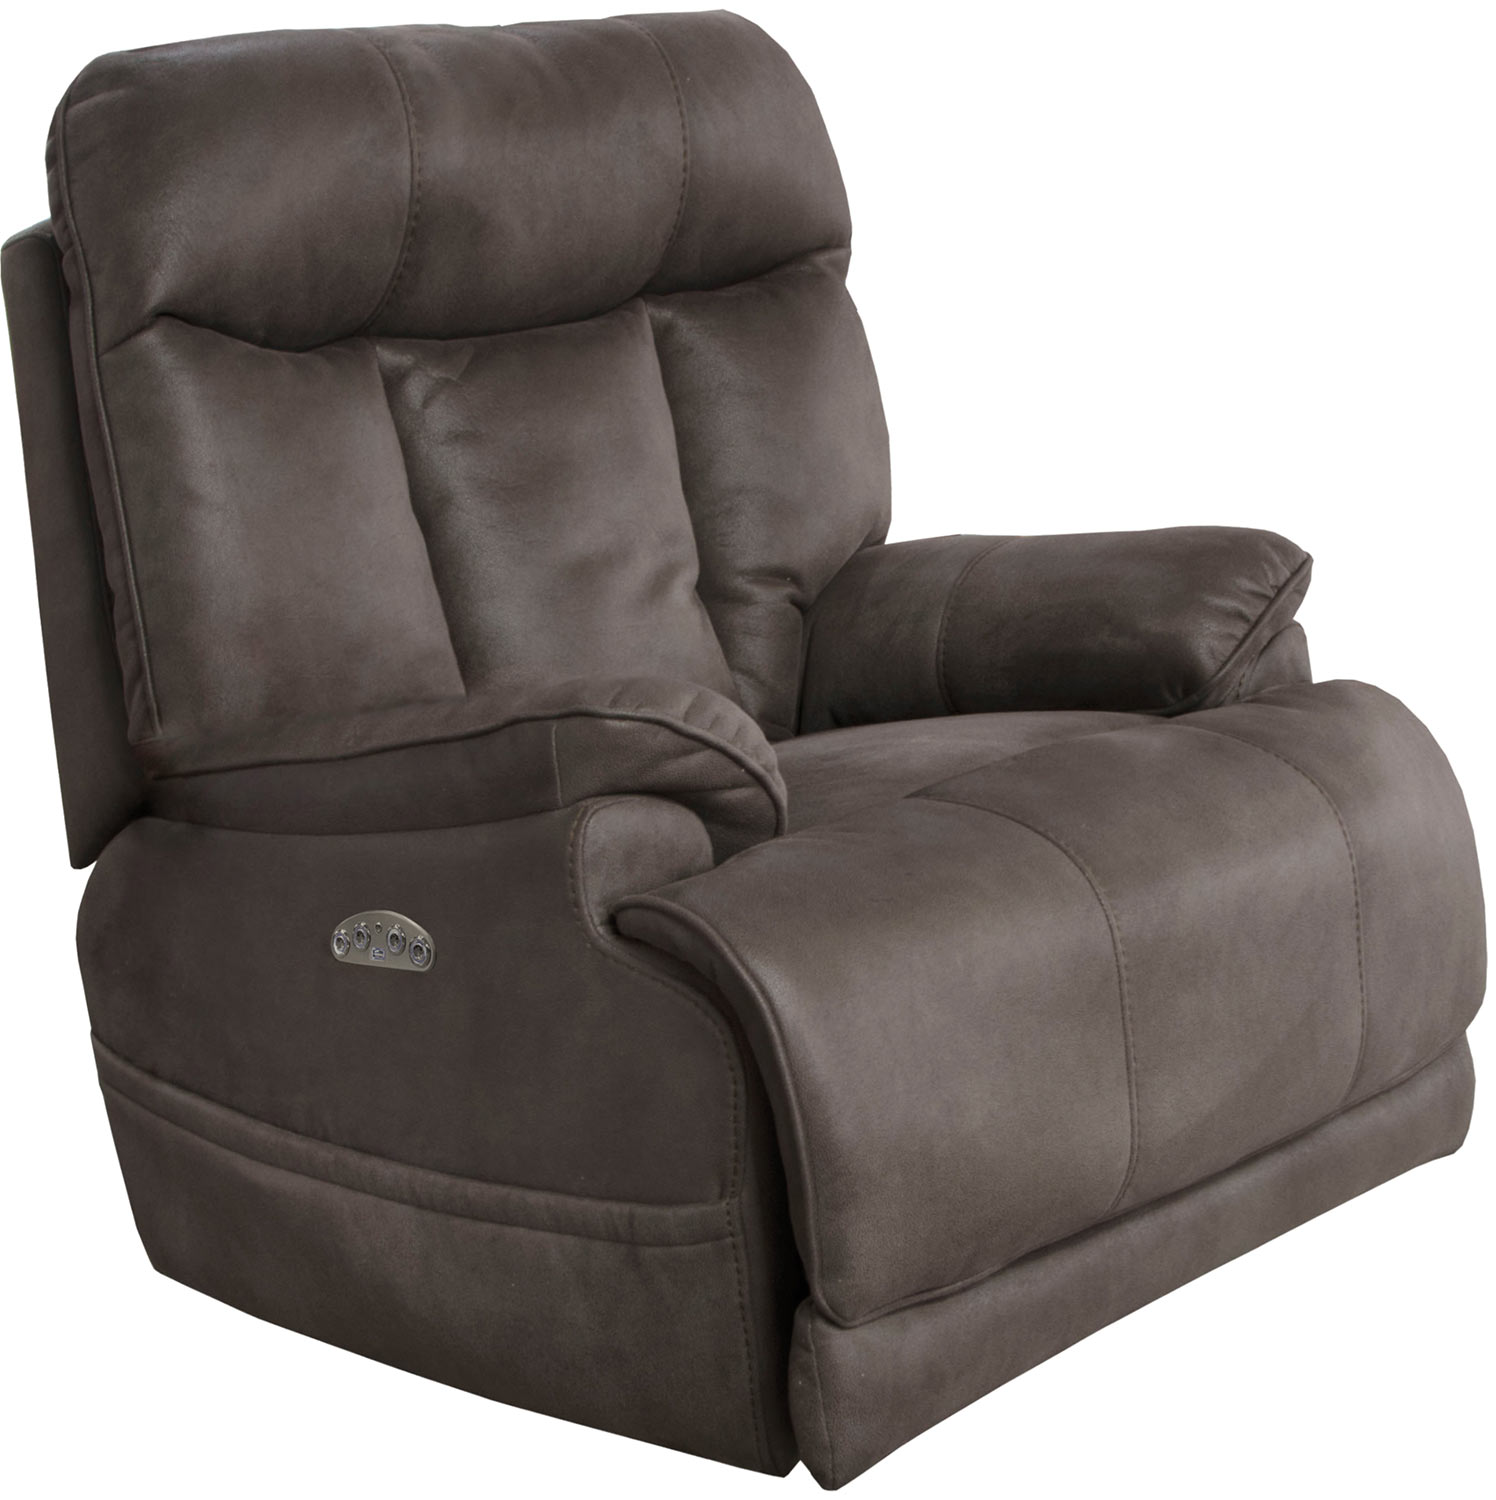 CatNapper Amos Power Recliner Chair - Charcoal